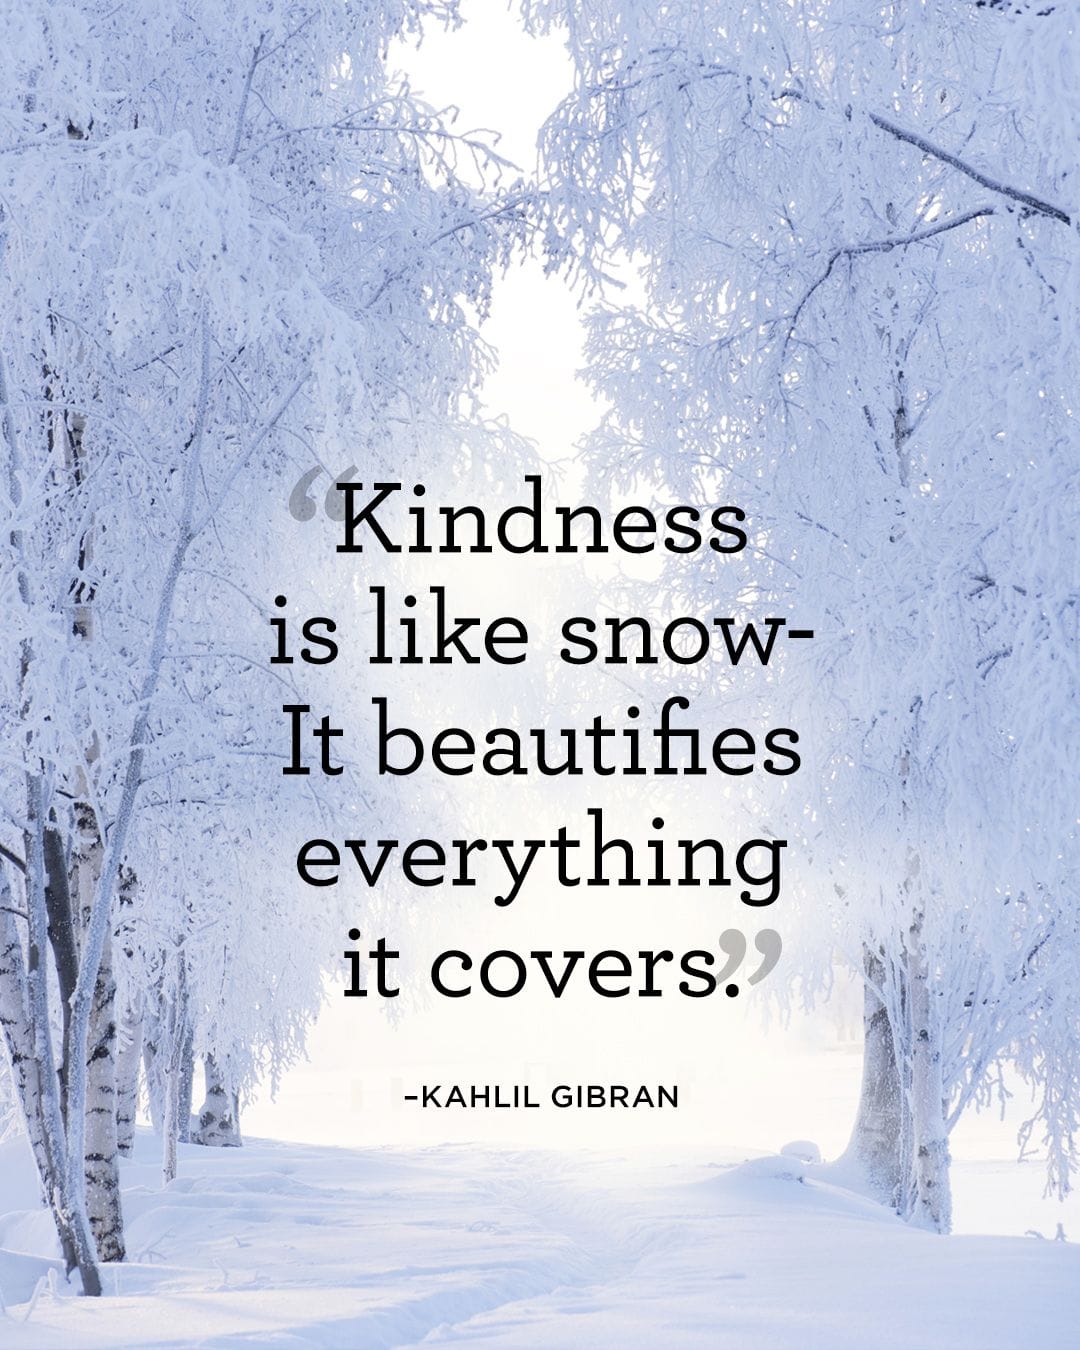 Kindness is like snow – It beautifies everything it covers. Kahlil Gibran